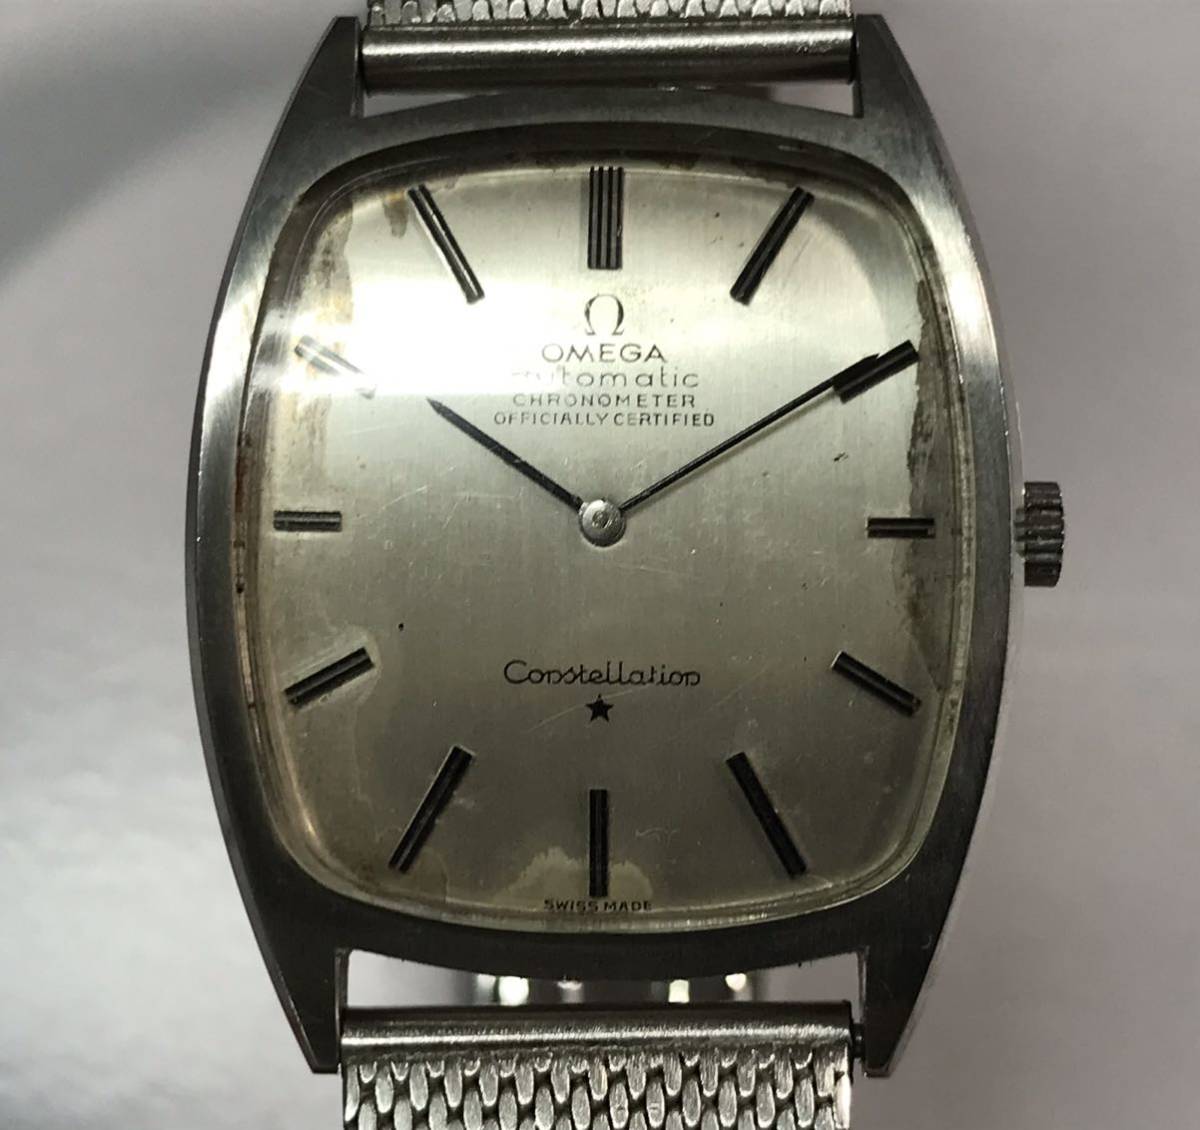 OMEGA Constellation オメガ コンステレーション 153.014 Cal.712 銀製ベルト chronometer OFFICIALLY CERTIFIED silver buckle は1251-9